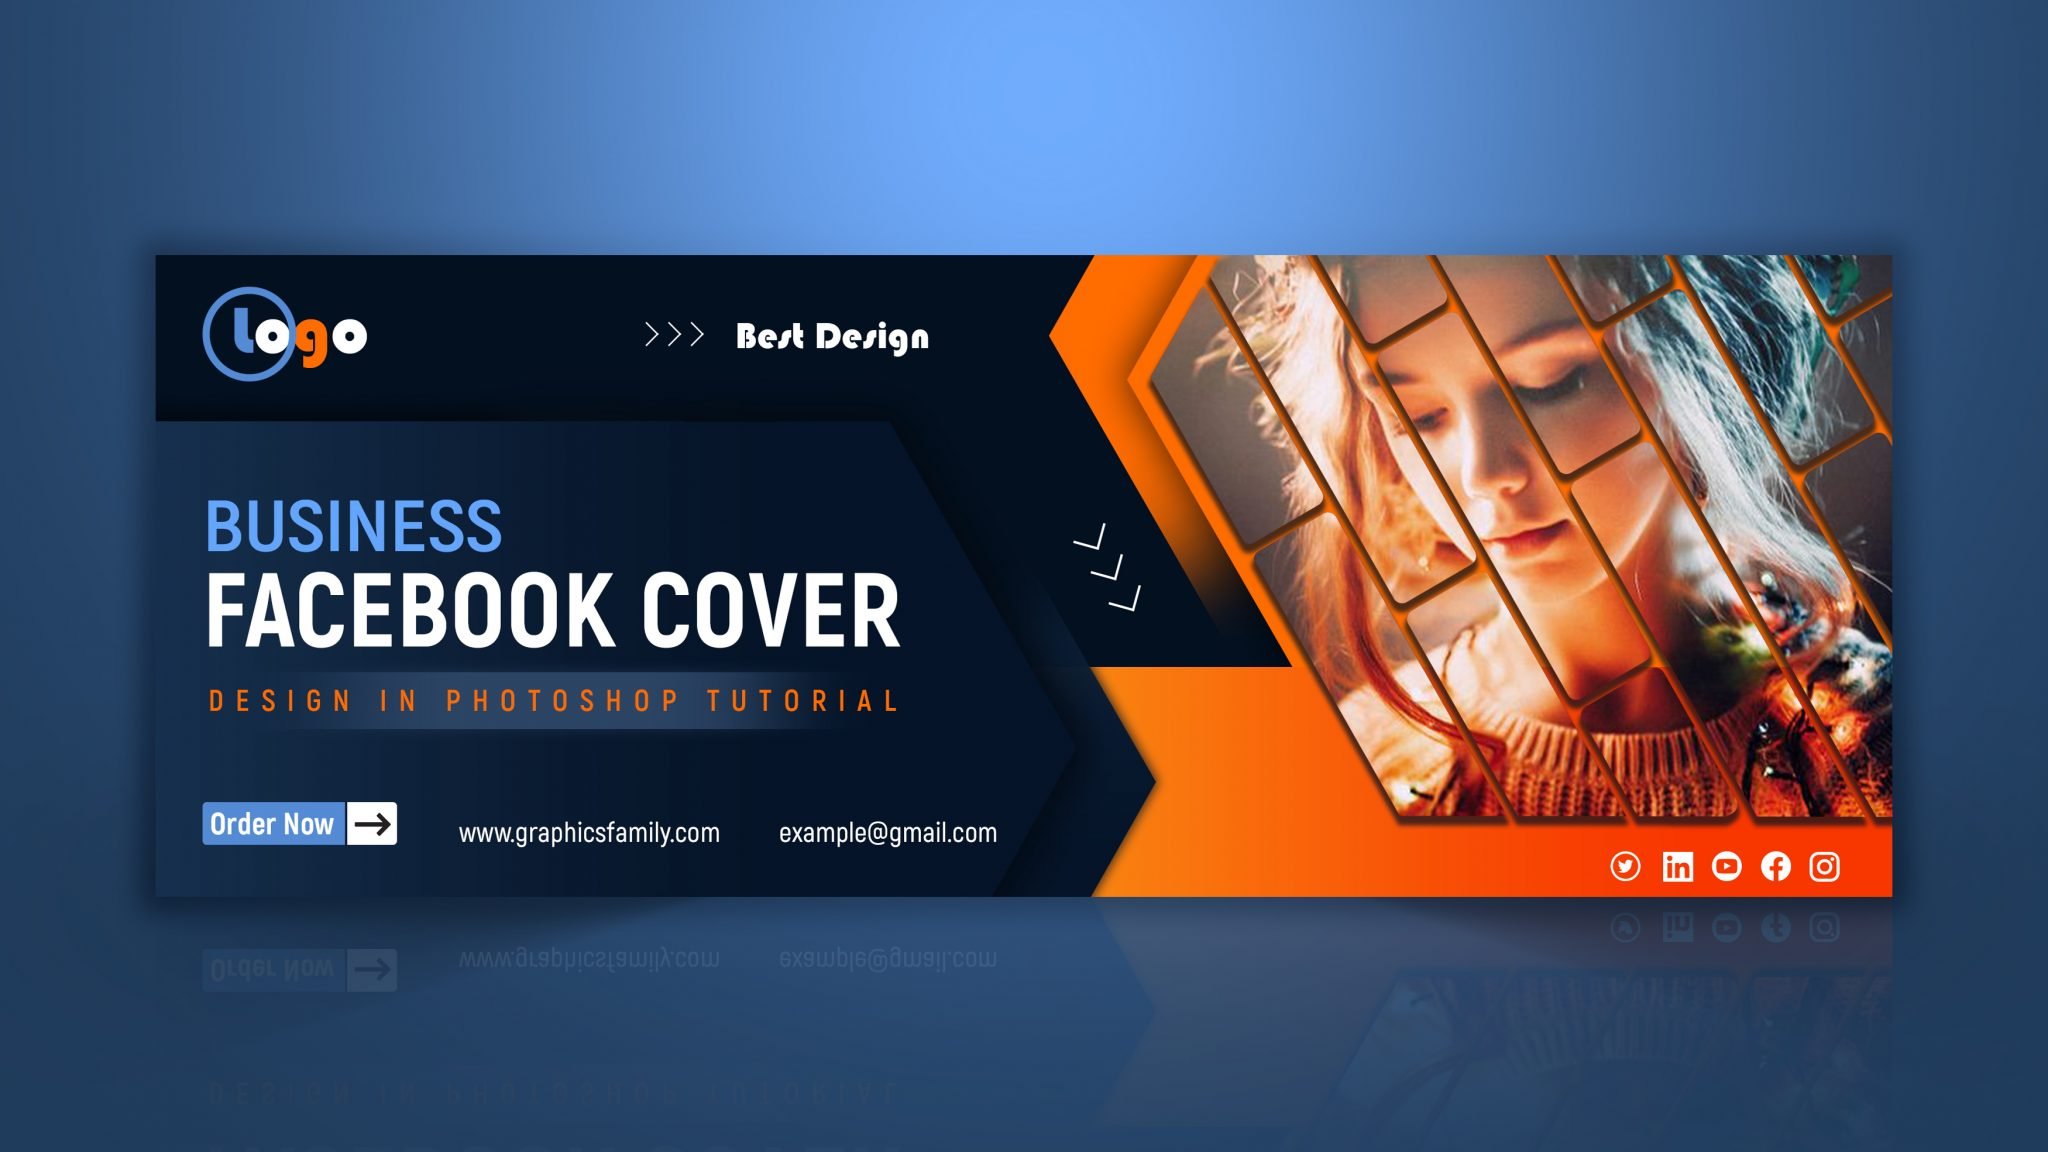 Editable Business Facebook Cover Design Template in